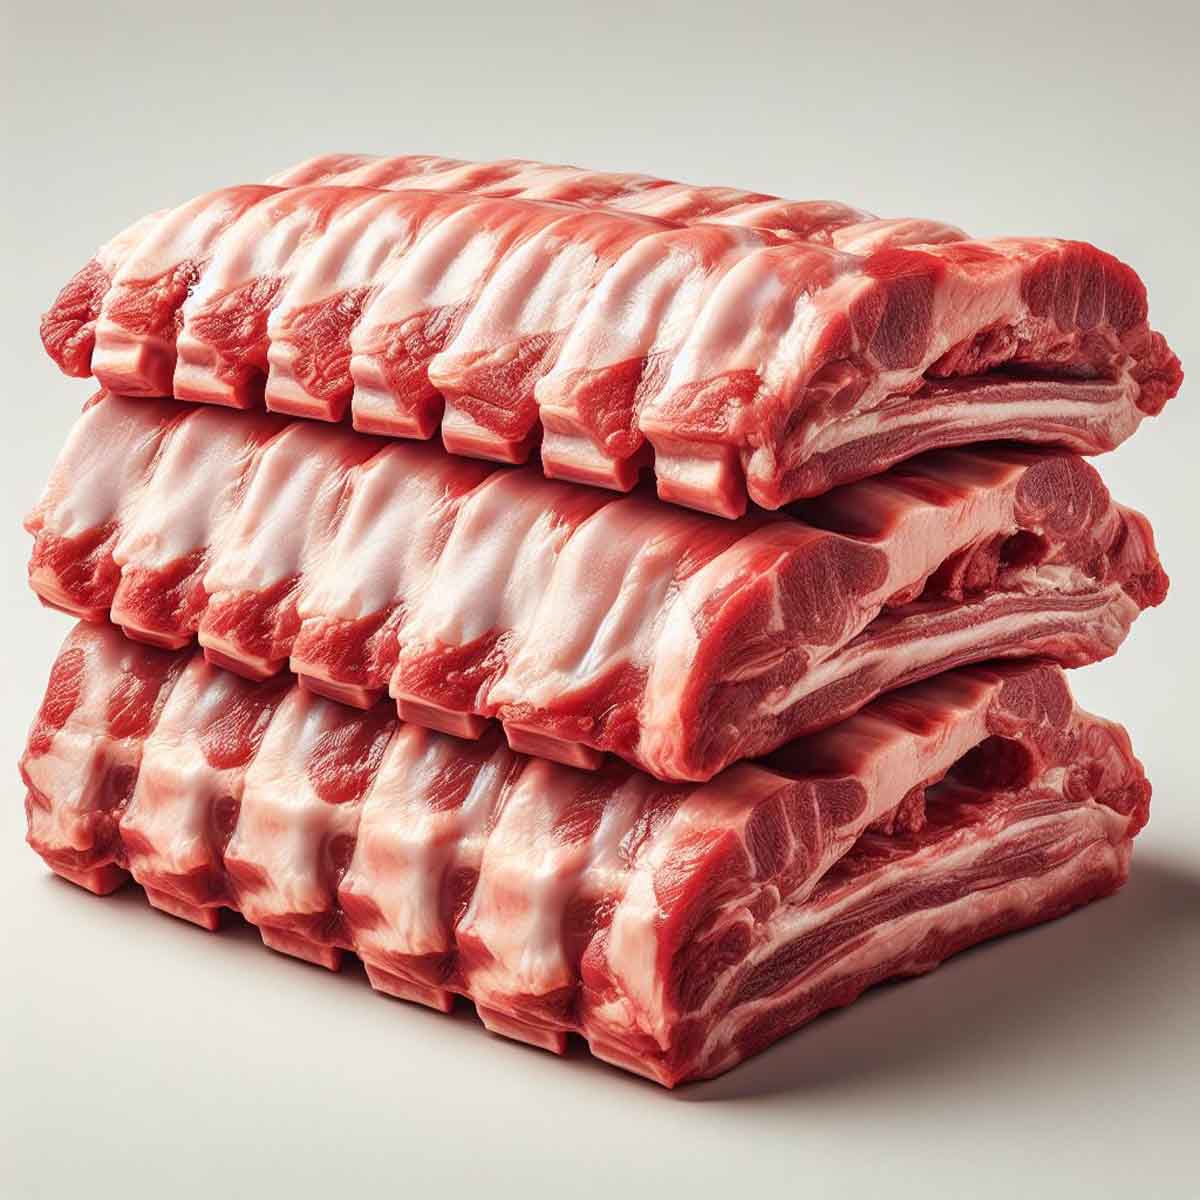 Raw pork ribs prepared and seasoned, ready to be frozen, with visible marbling and a moist surface.